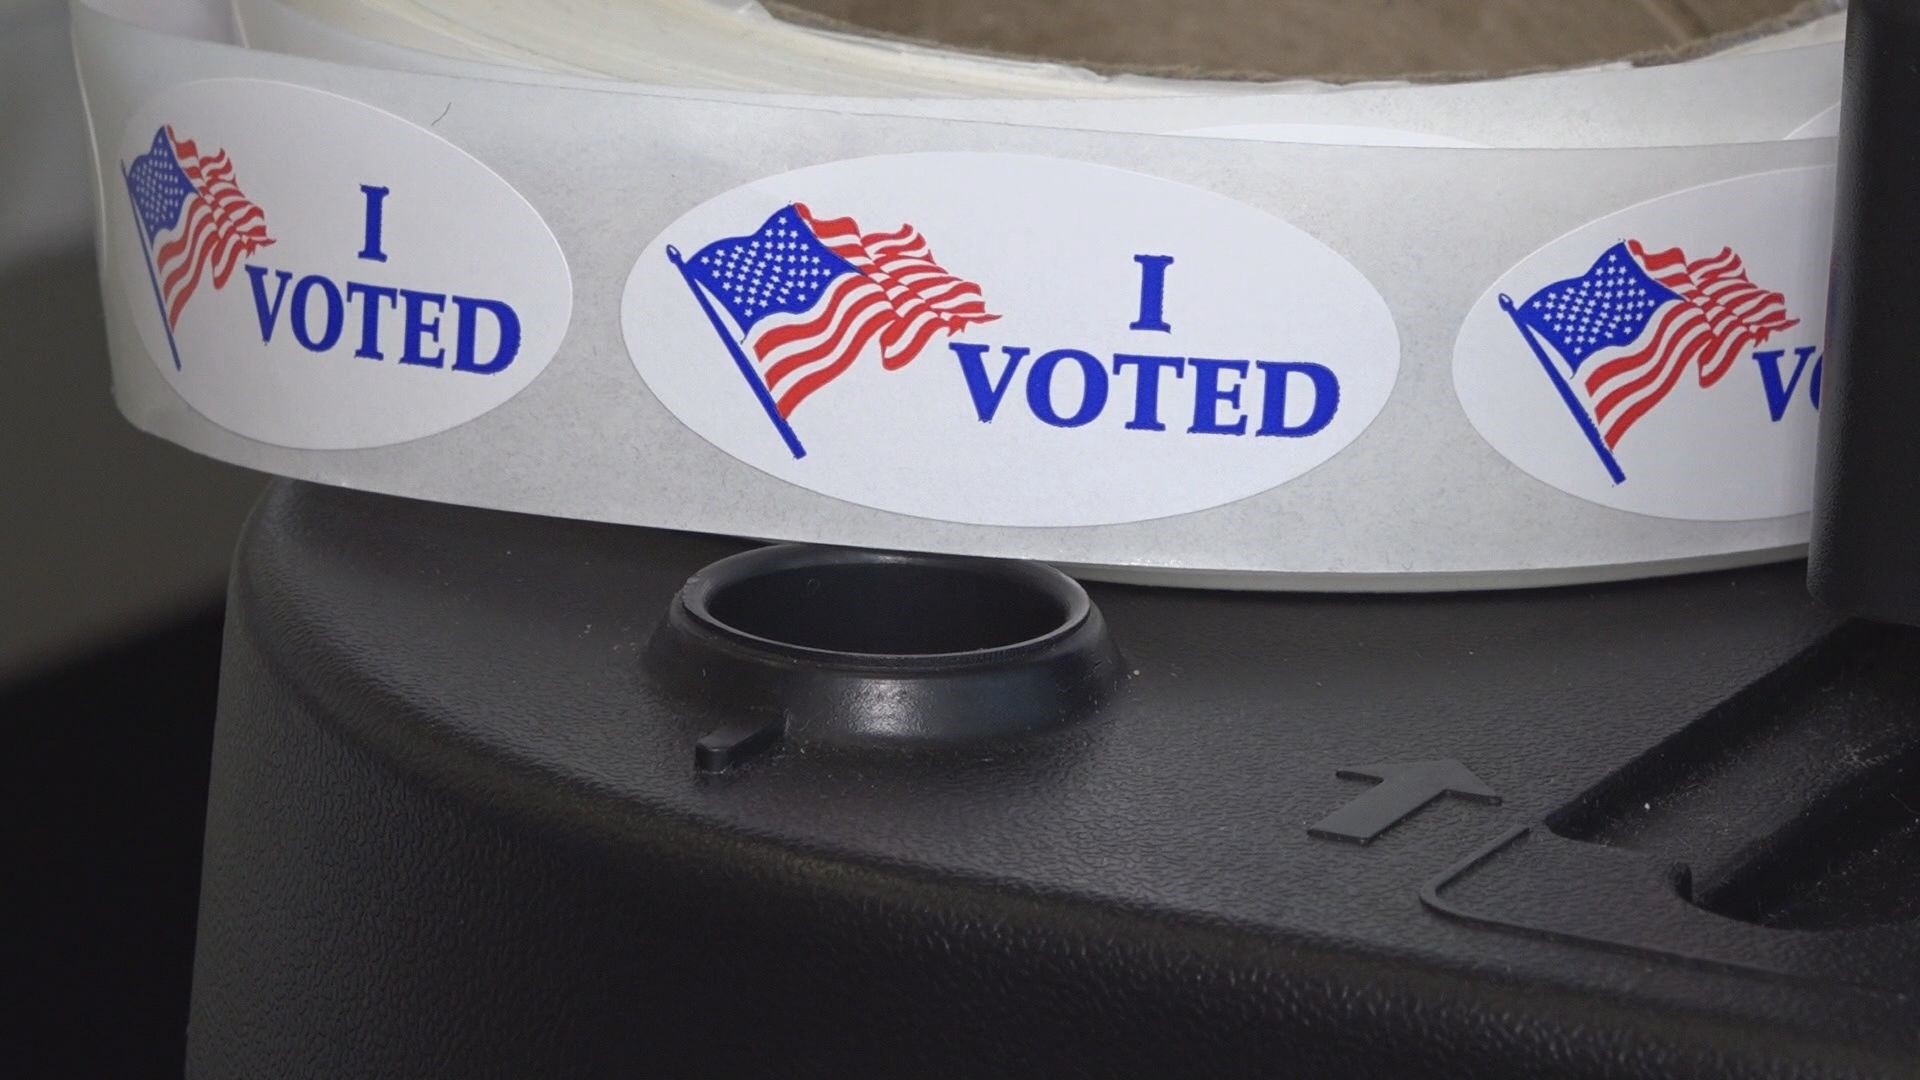 A poll worker has been charged, accused of putting a USB drive into a poll machine, potentially compromising voter information.